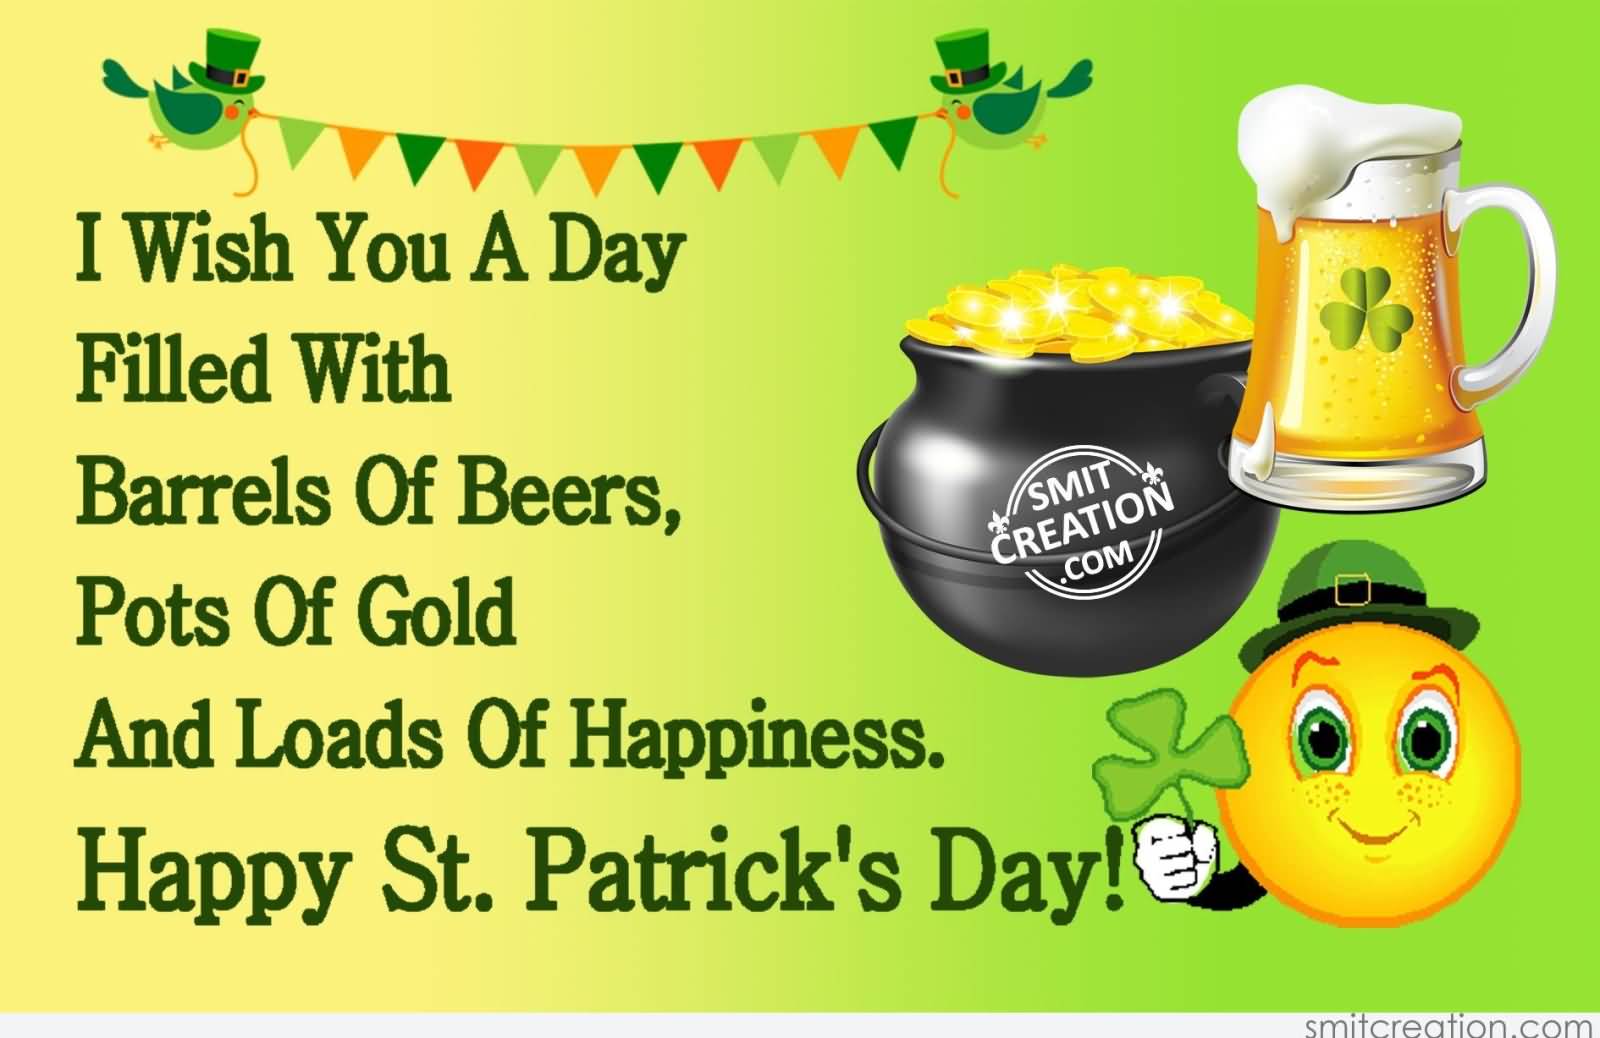 I Wish A Day Filled With Barrels Of Beers, Pots Of Gold And Loads Of Happiness Happy Saint Patrick's Day